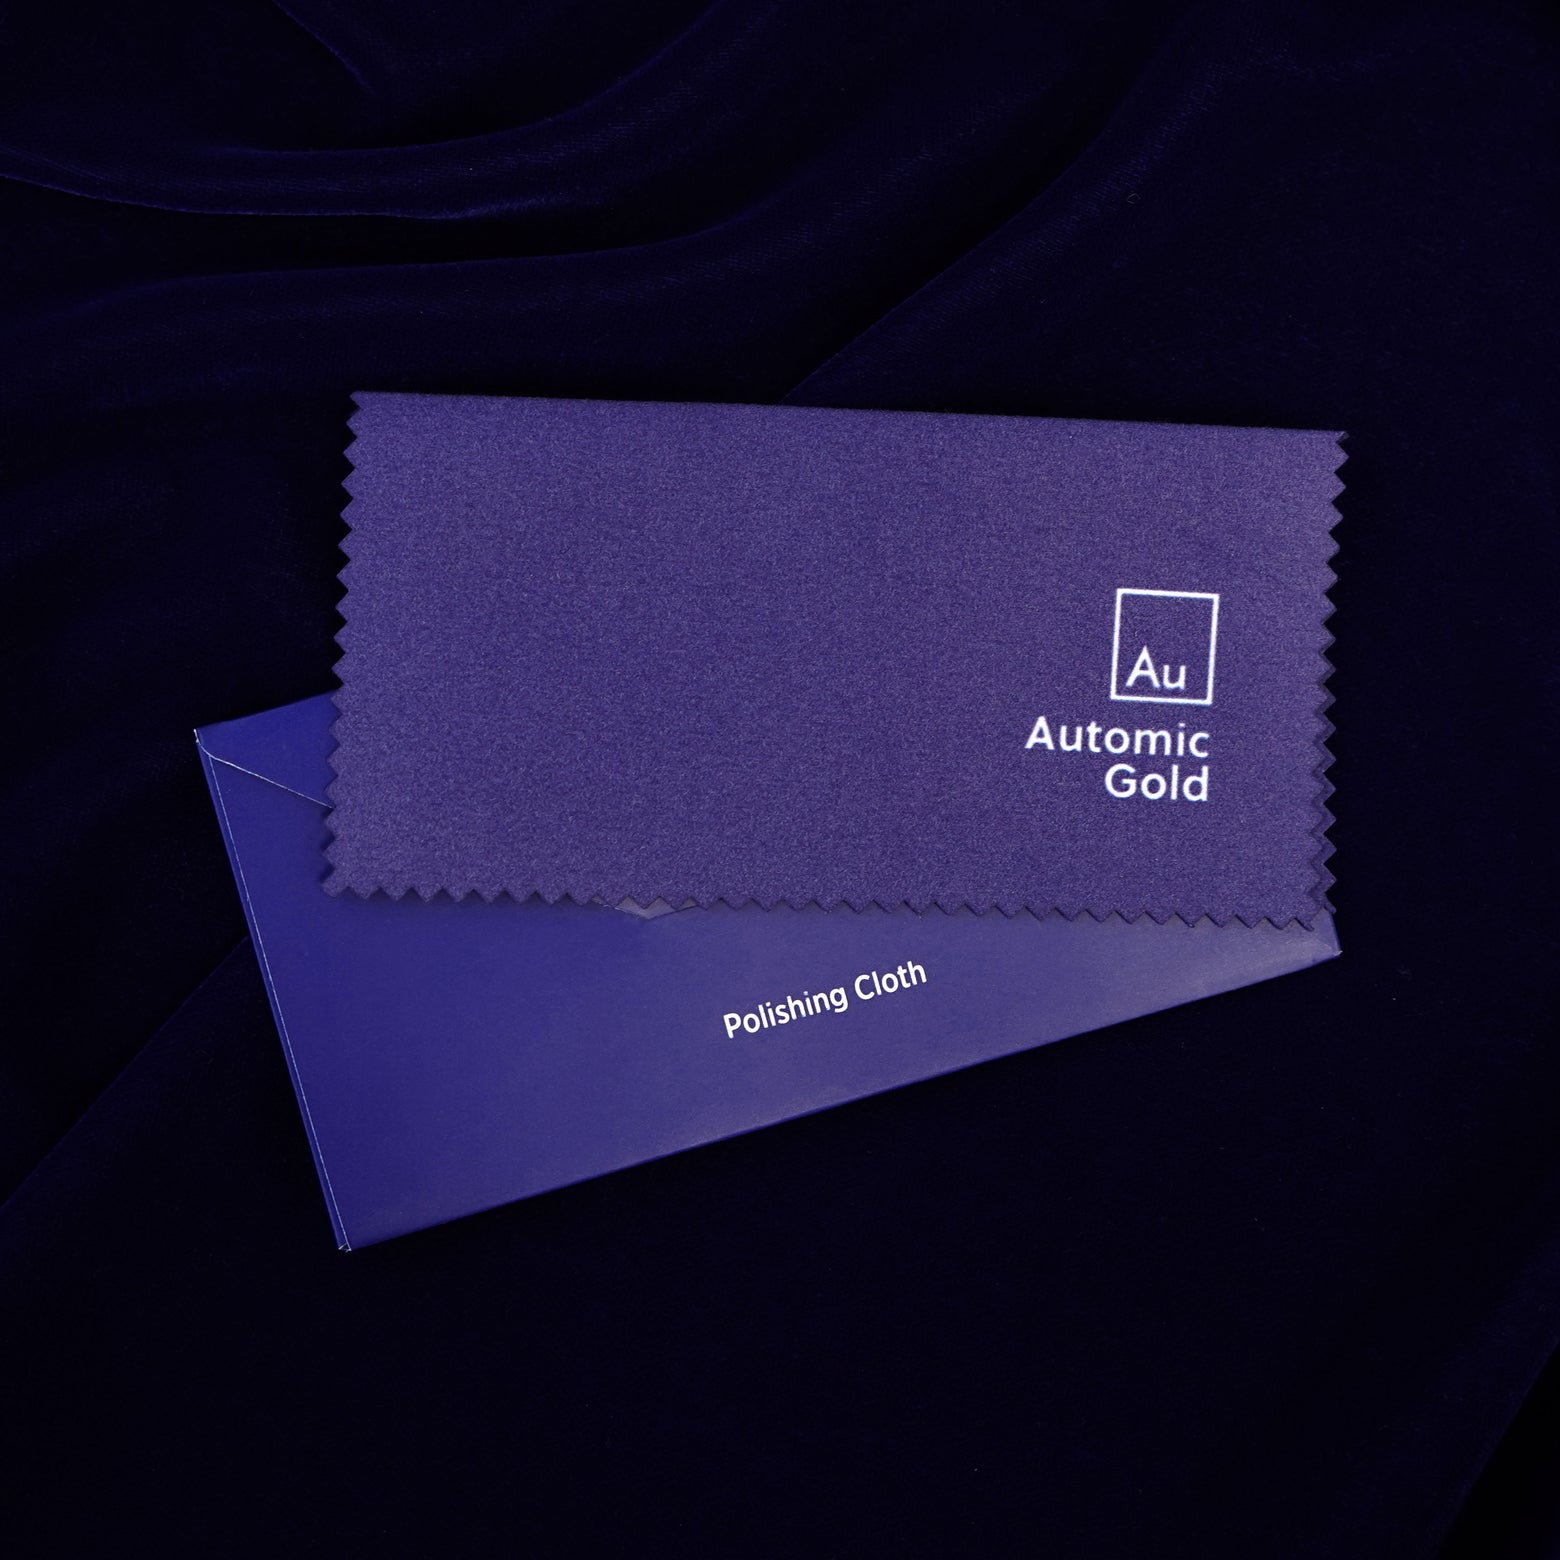 An Automic Gold jewelry polishing cloth laying on top of a blue envelope